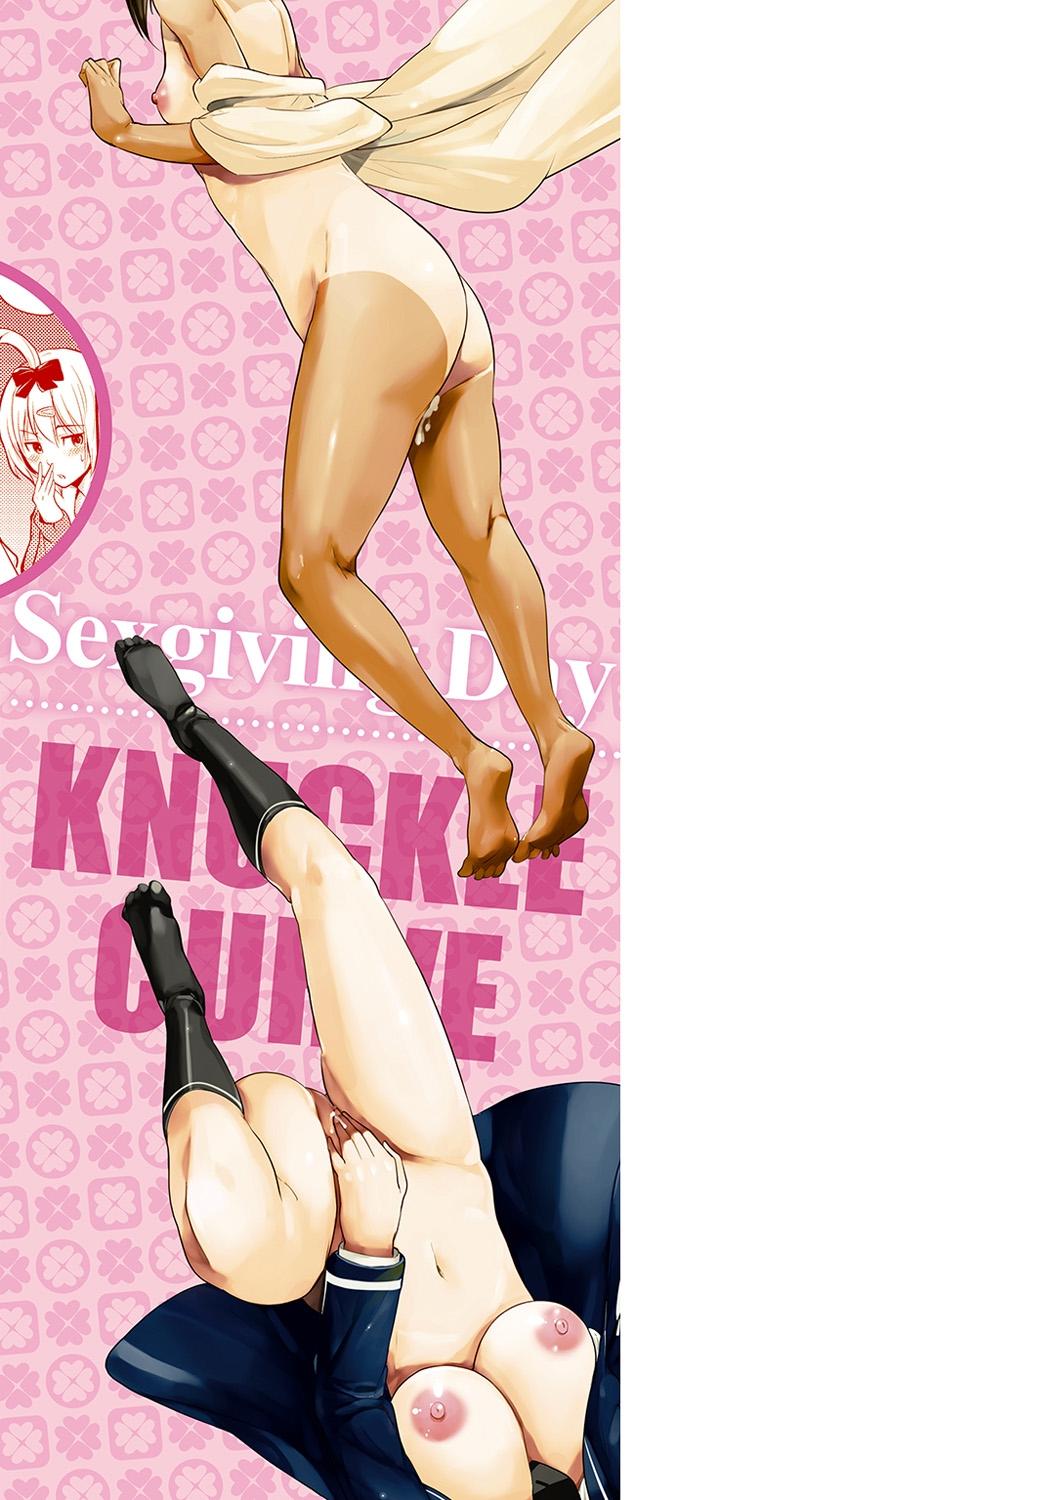 [Knuckle Curve] Onii-chan Kanshasai - Sexgiving Day [Digital] 223